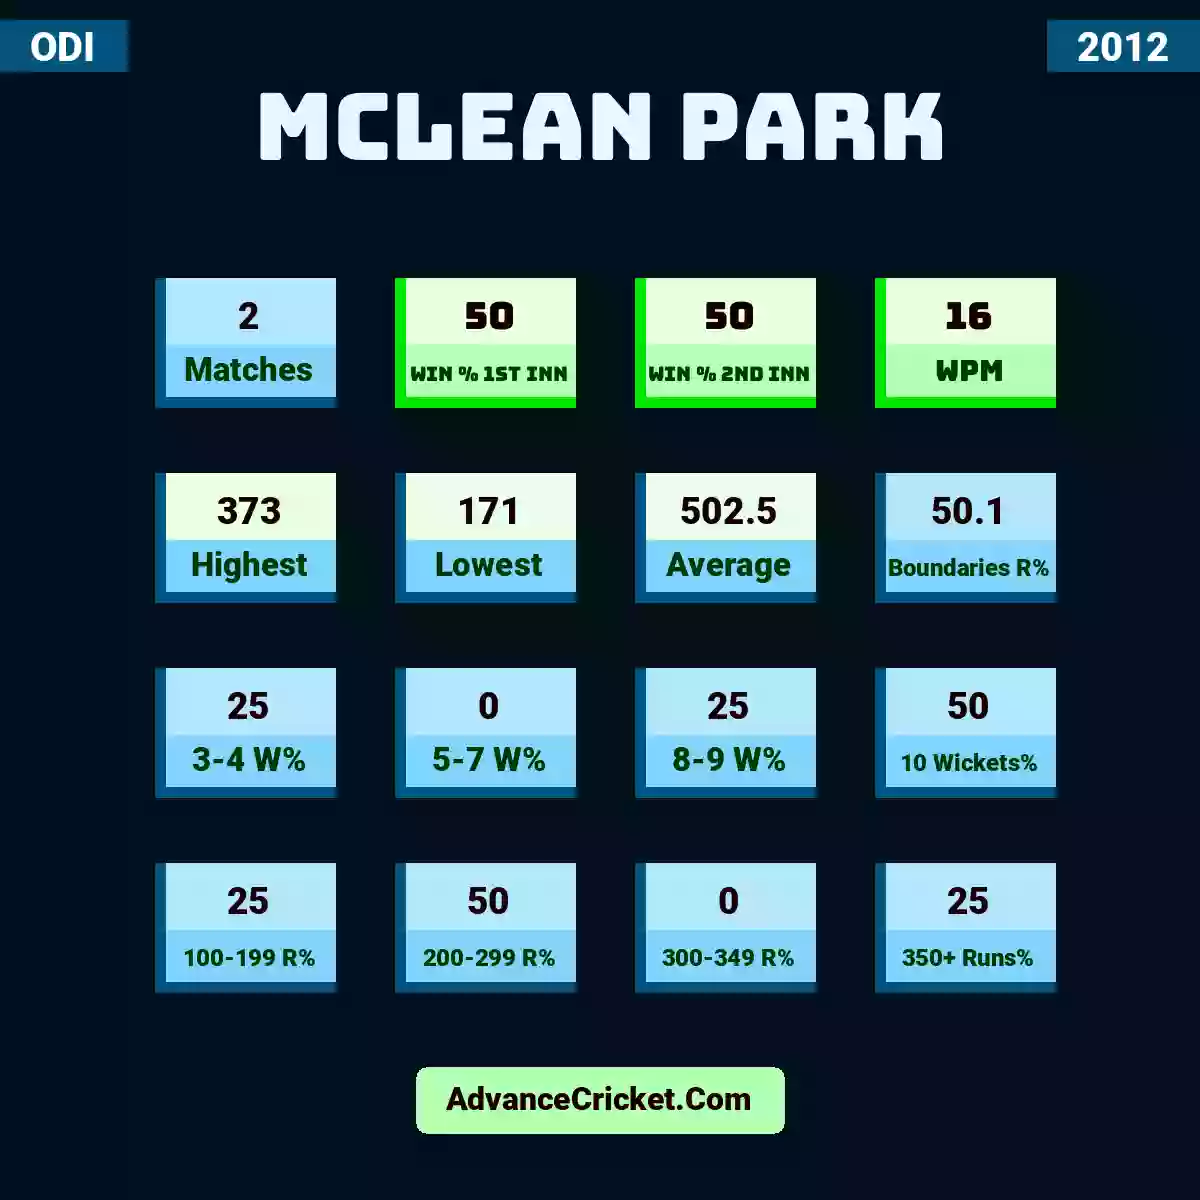 Image showing McLean Park with Matches: 2, Win % 1st Inn: 50, Win % 2nd Inn: 50, WPM: 16, Highest: 373, Lowest: 171, Average: 502.5, Boundaries R%: 50.1, 3-4 W%: 25, 5-7 W%: 0, 8-9 W%: 25, 10 Wickets%: 50, 100-199 R%: 25, 200-299 R%: 50, 300-349 R%: 0, 350+ Runs%: 25.